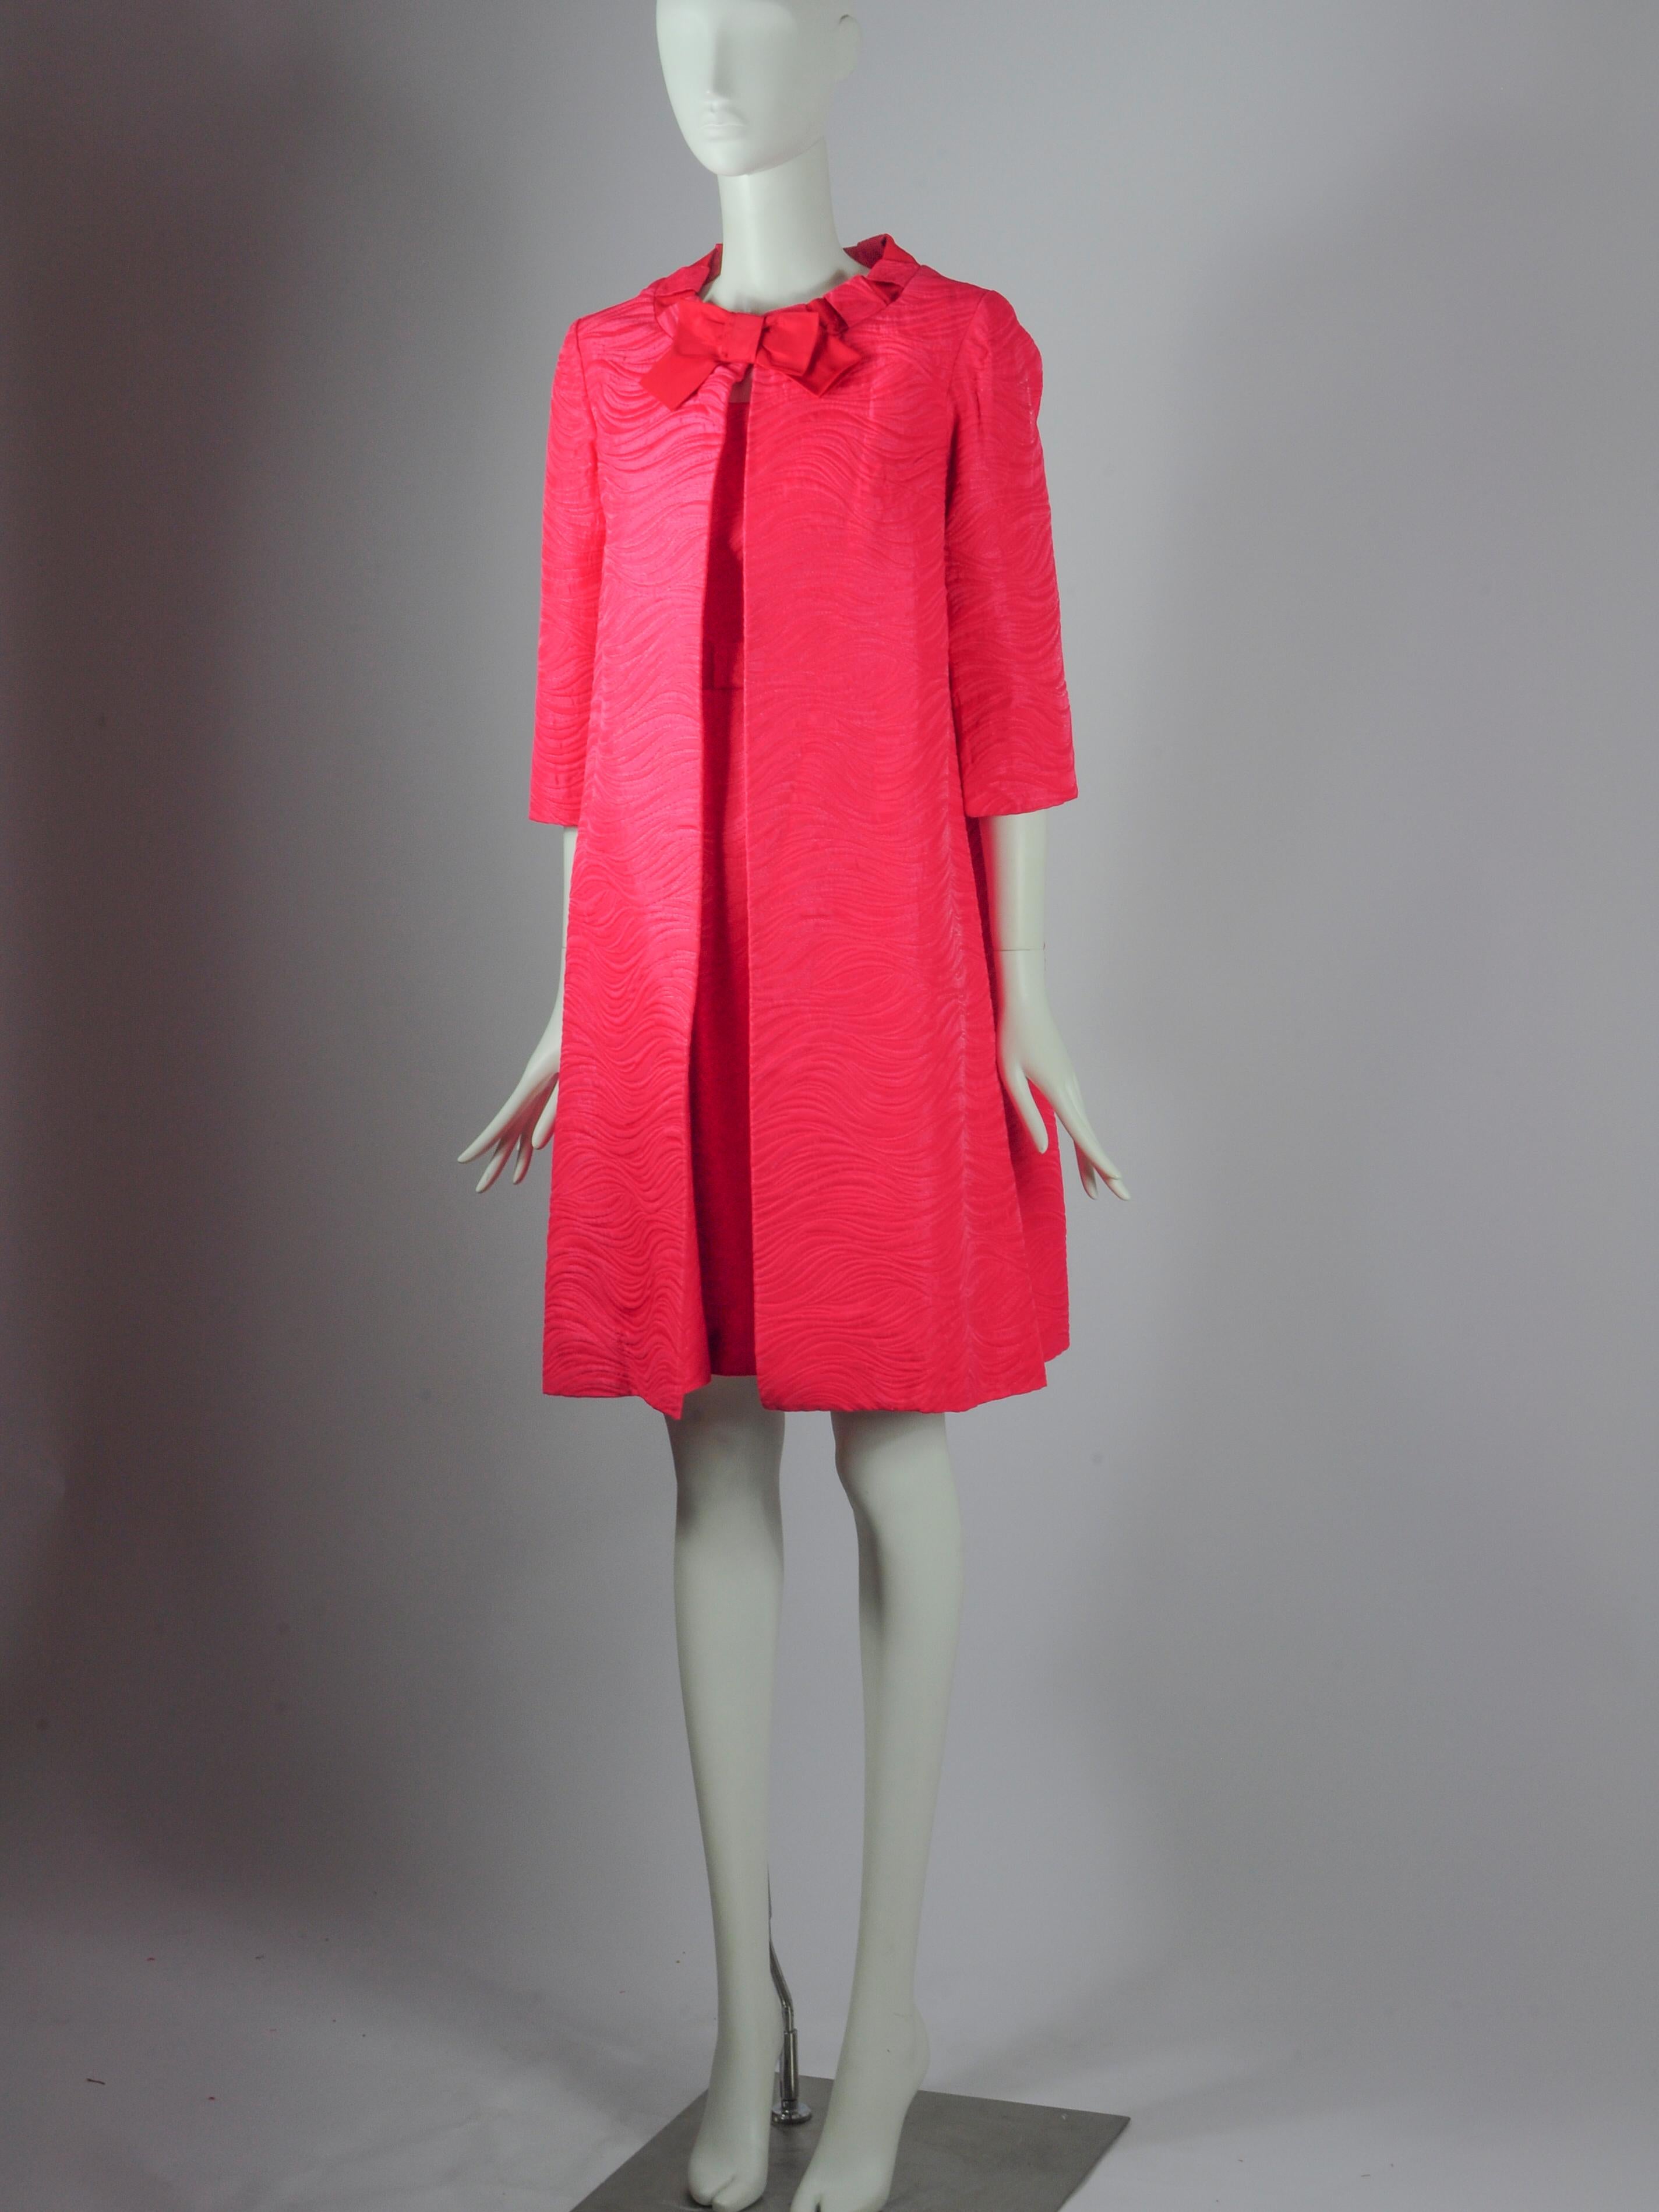 Vintage Jean Allen London two-piece set consisting of a jacket and a sleeveless dress in fuchsia pink with bow details. The fabric is a beautiful structured fabric with a wave pattern and a slight metallic thread woven into it. It has a very much